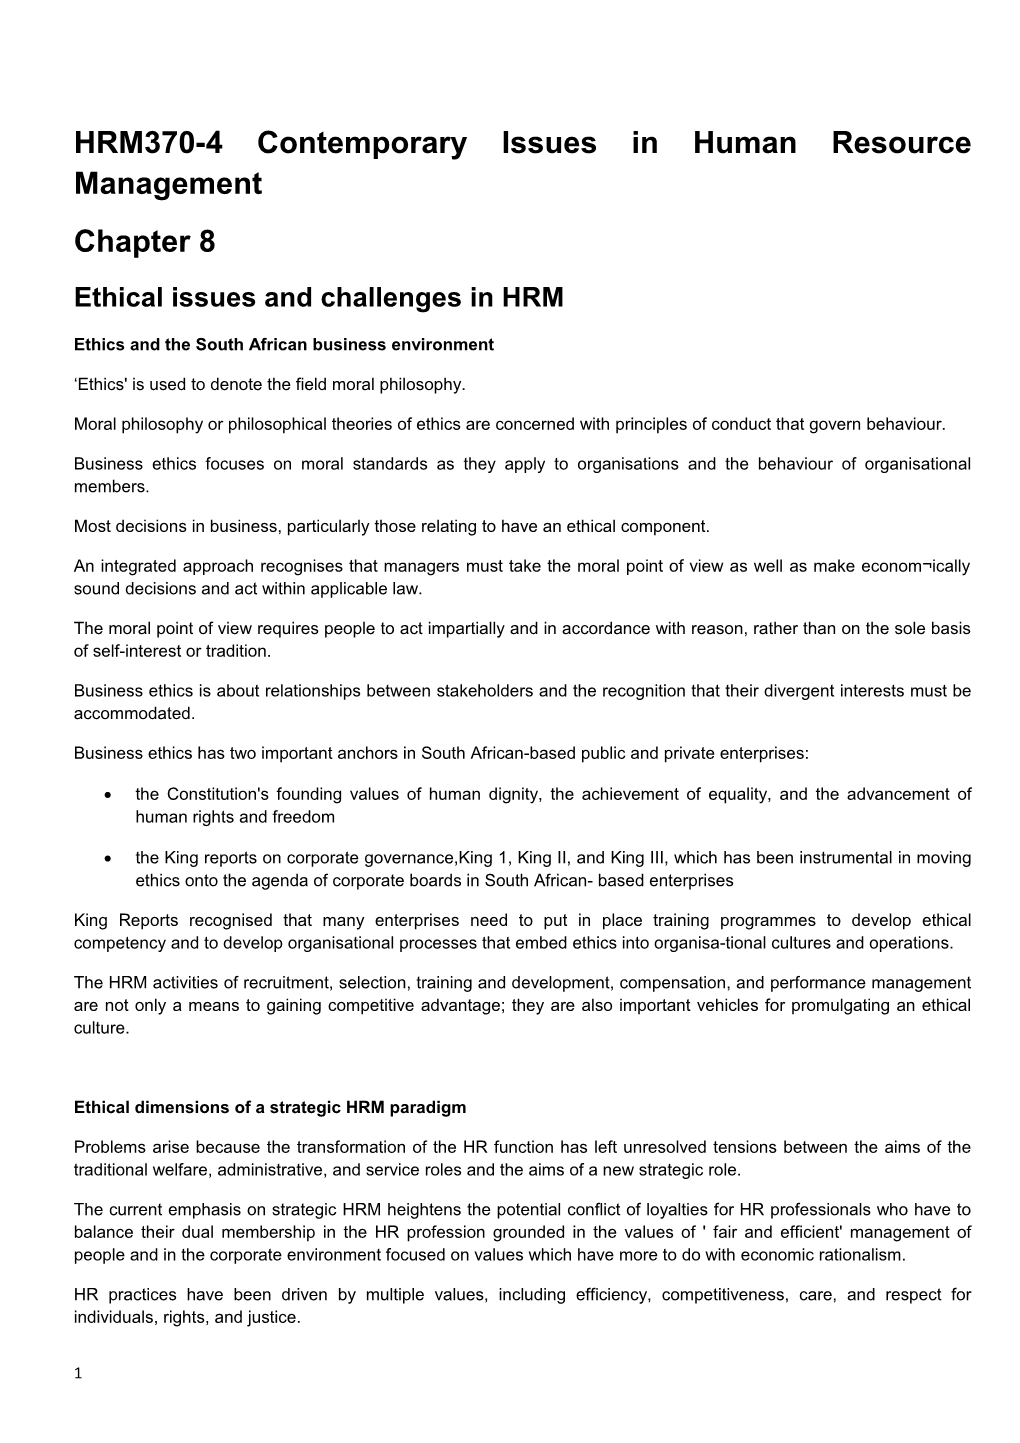 HRM370-4 Contemporary Issues in Human Resource Management